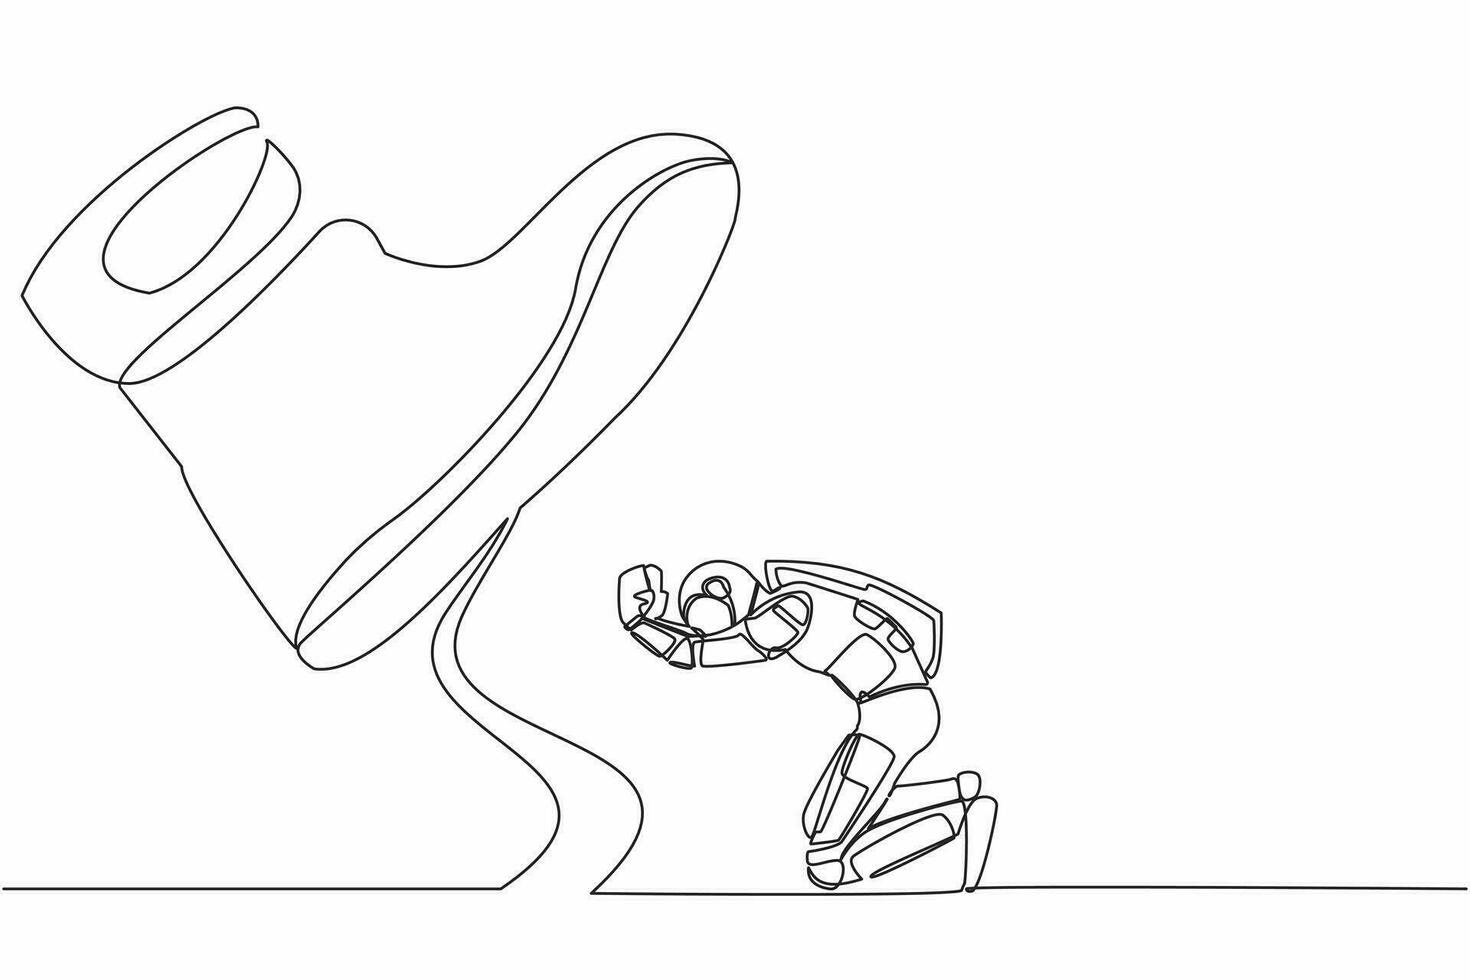 Single continuous line drawing young astronaut kneel down under giant feet. Concept for science authority, exploitation, dictator figure. Cosmonaut deep space. One line draw design vector illustration